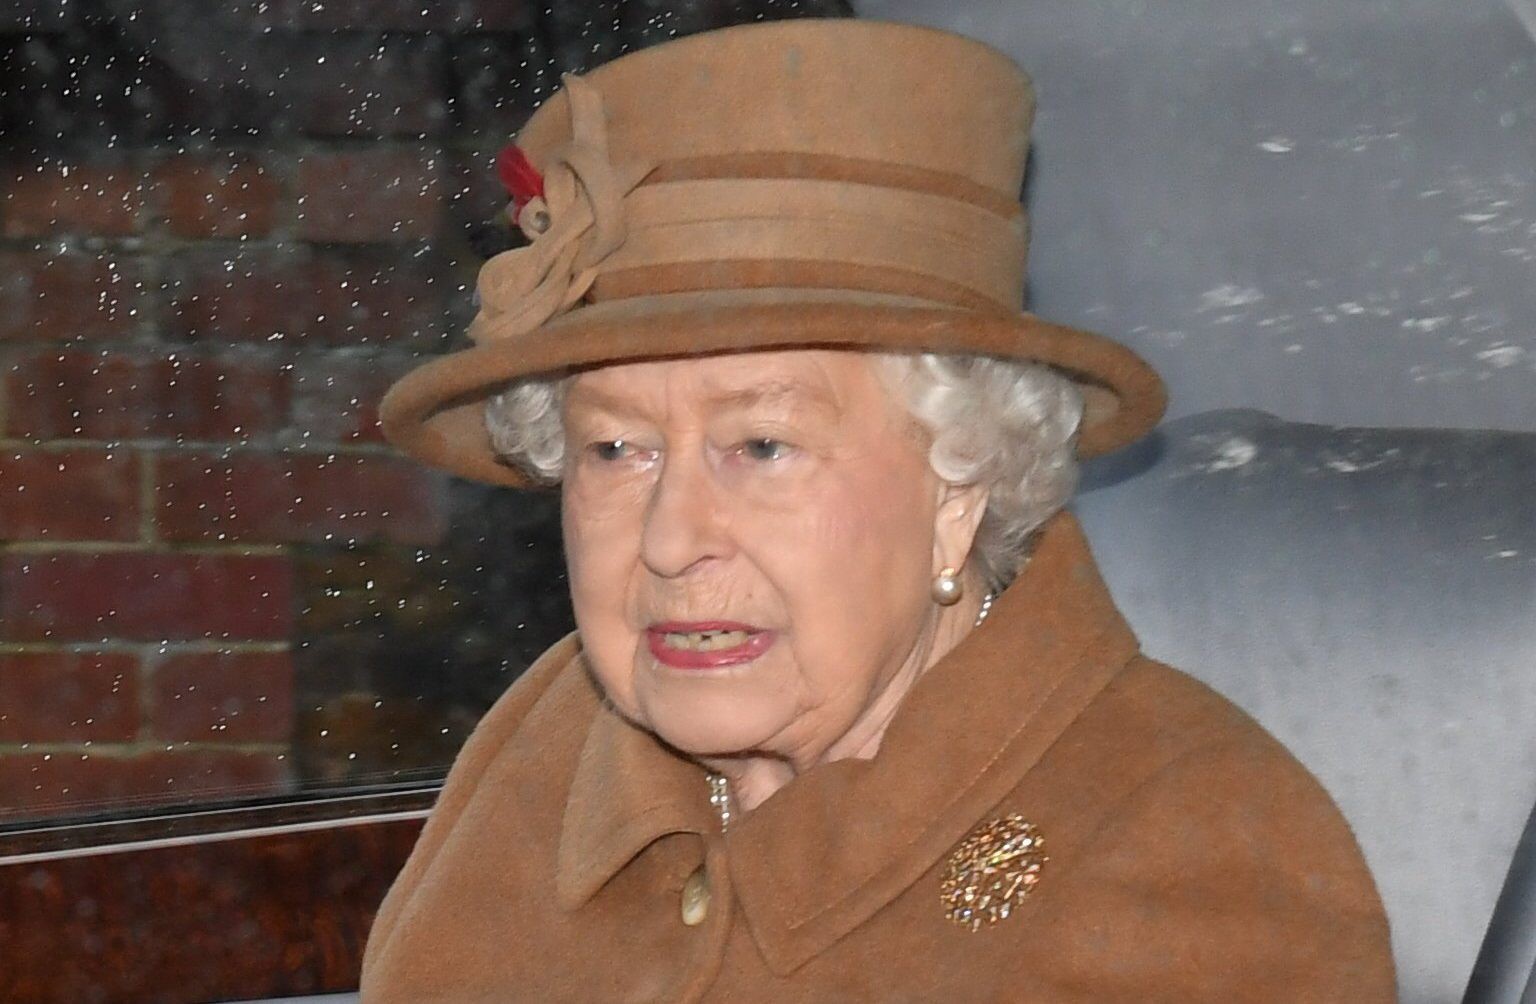 The Queen stressed the importance of family after the summit